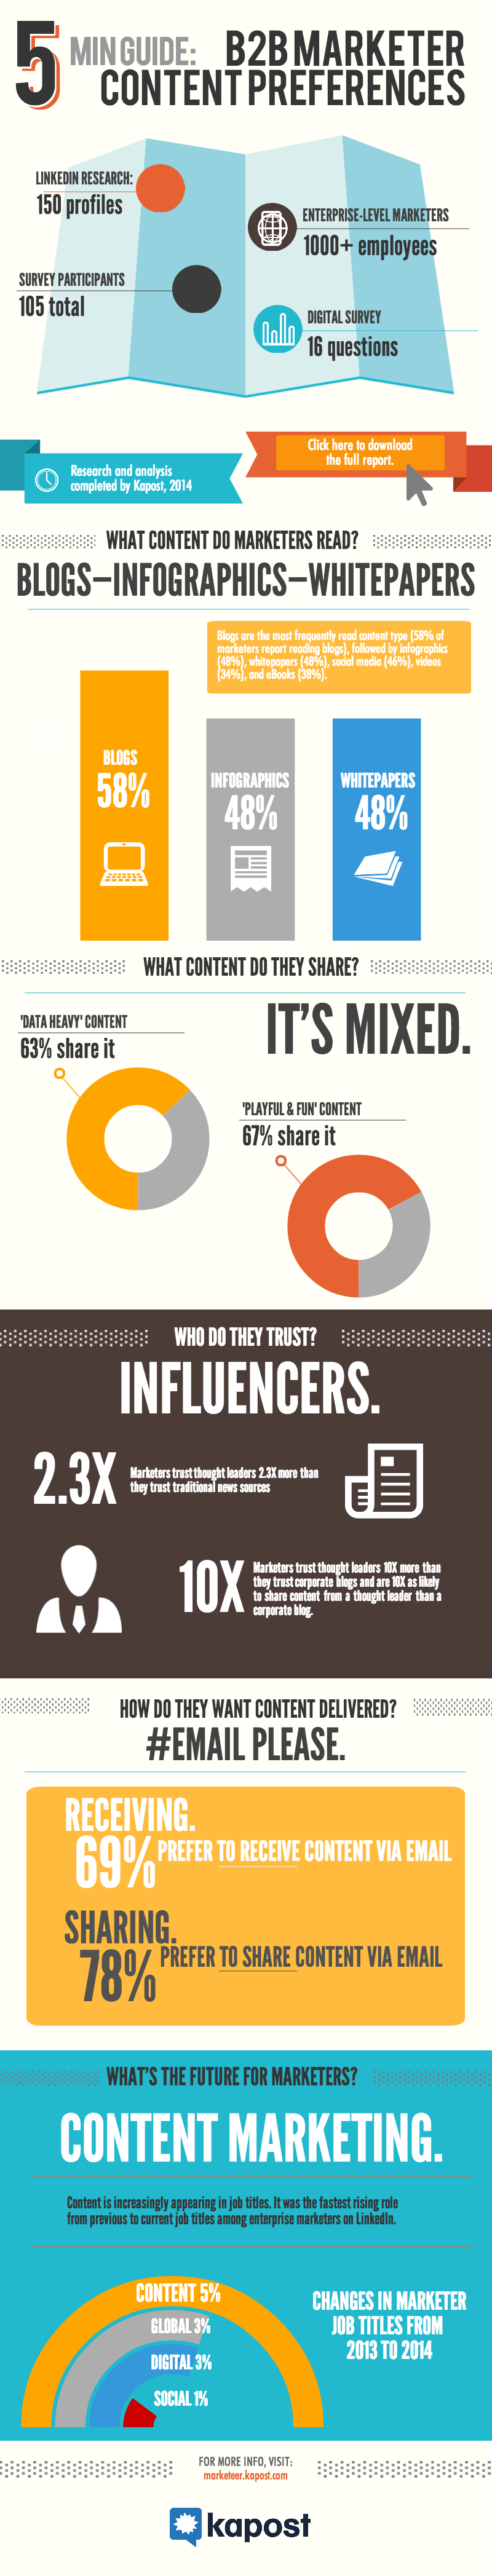 enterprise-marketer-research-infographic